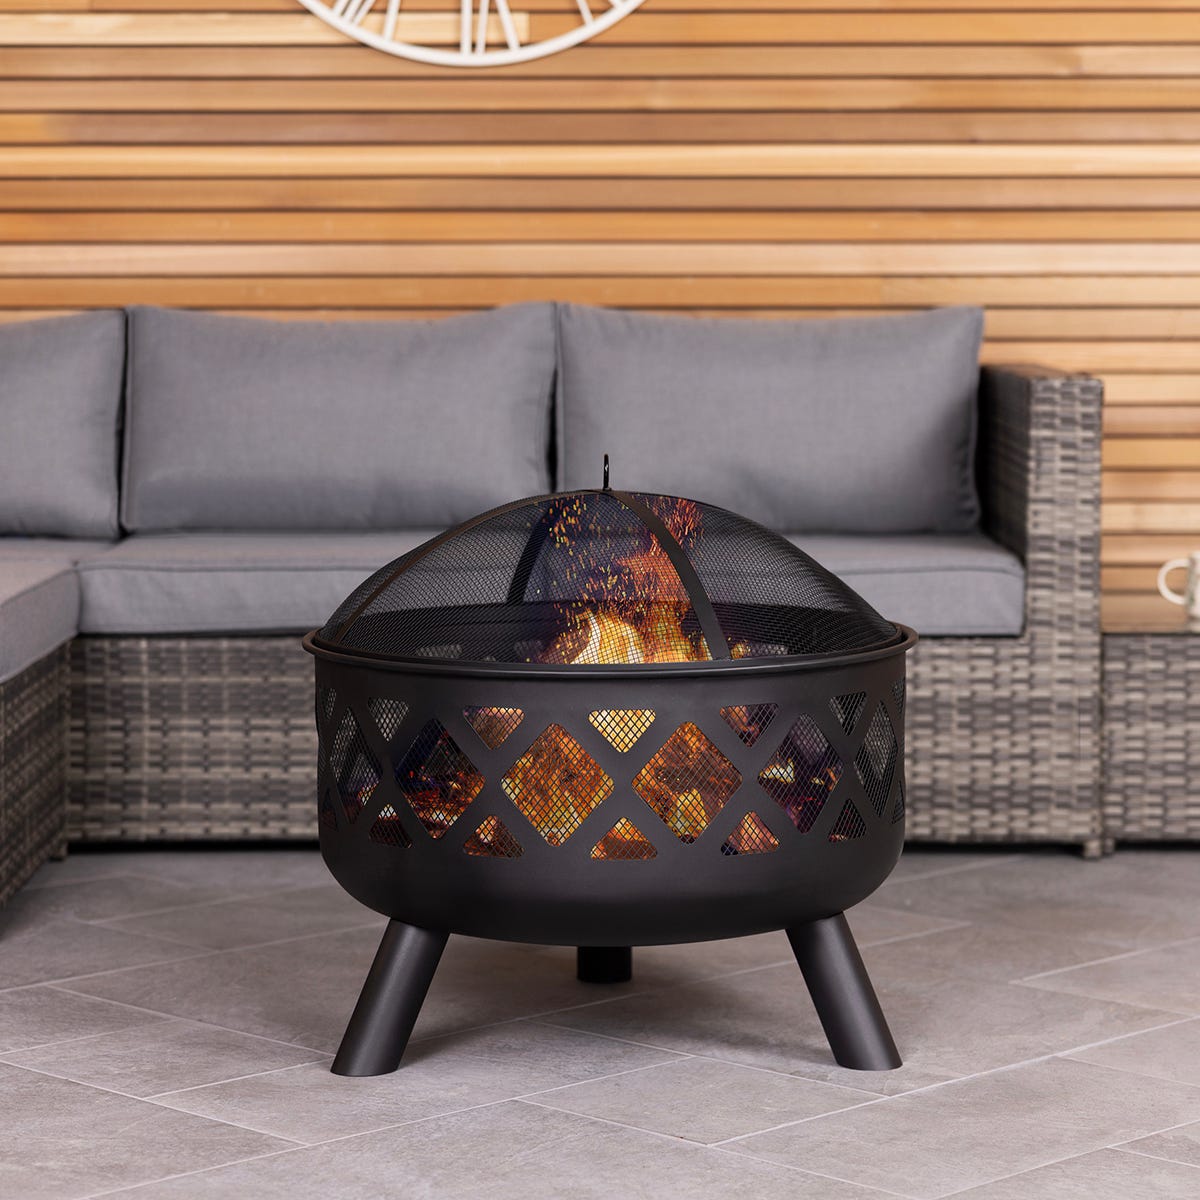 Charles Bentley Large Round Black Metal Fire Pit With Mesh Cover